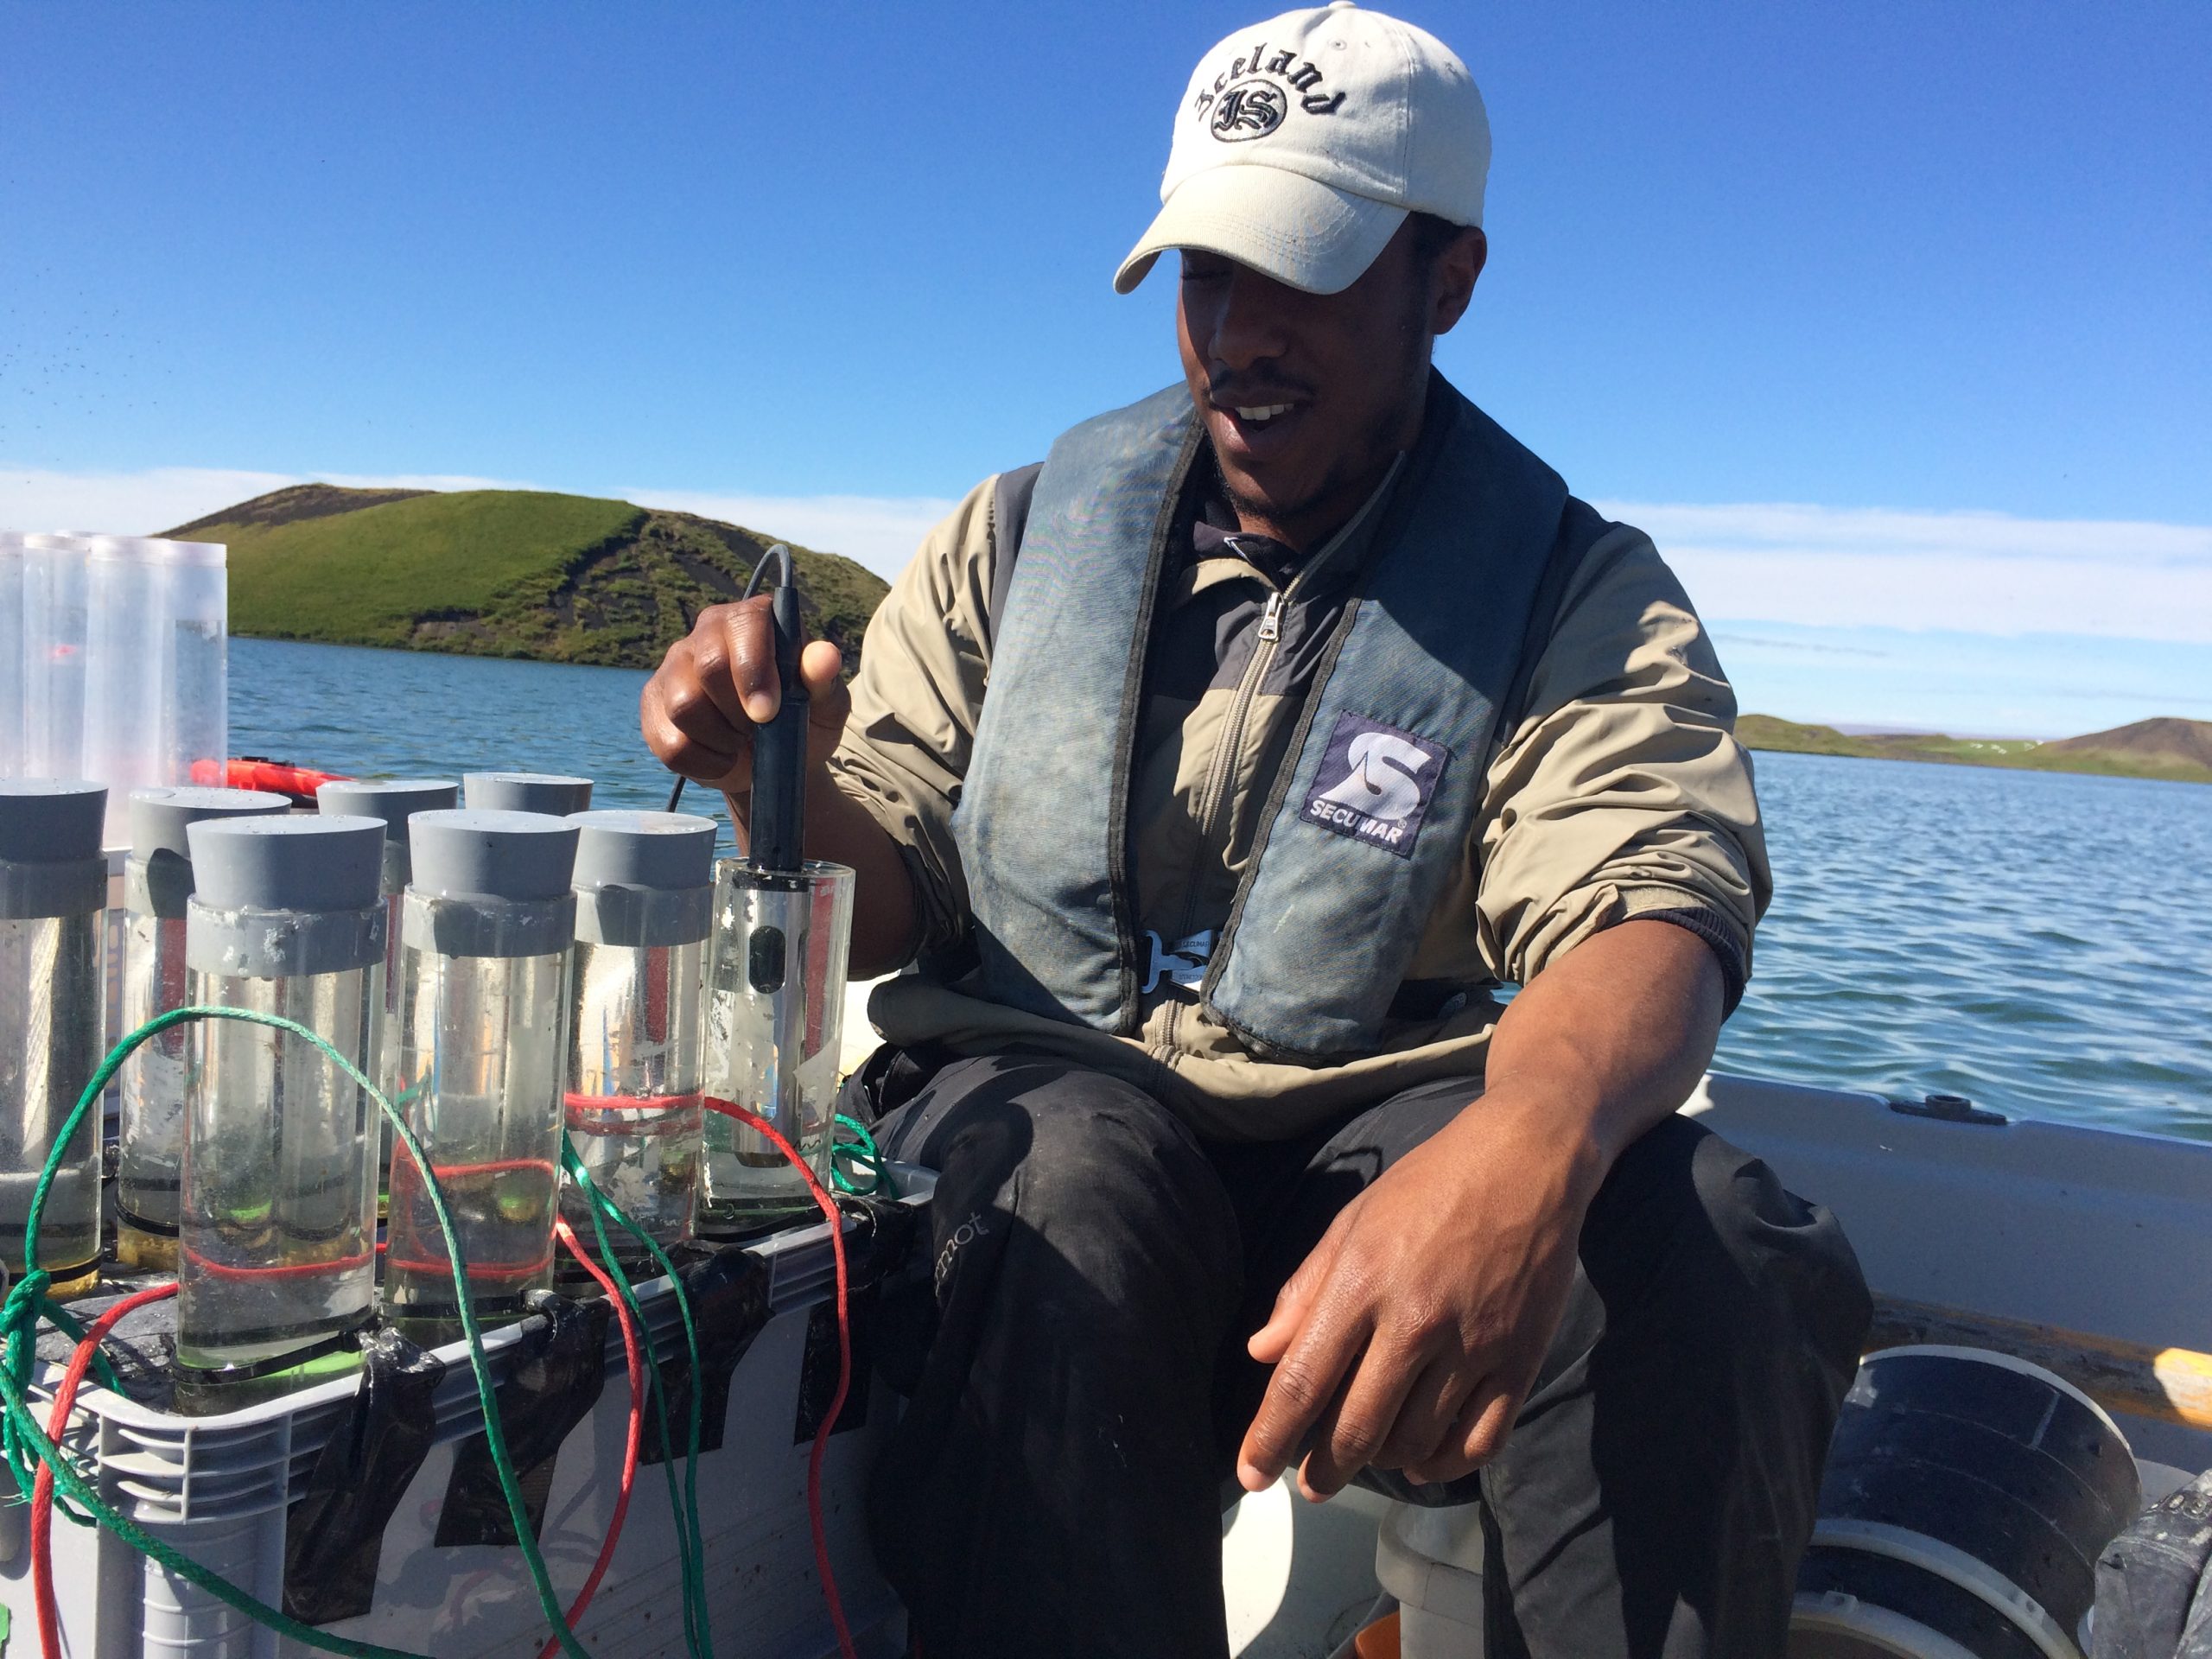 Dr. Matt McCary measures water using field instrument on a boat.